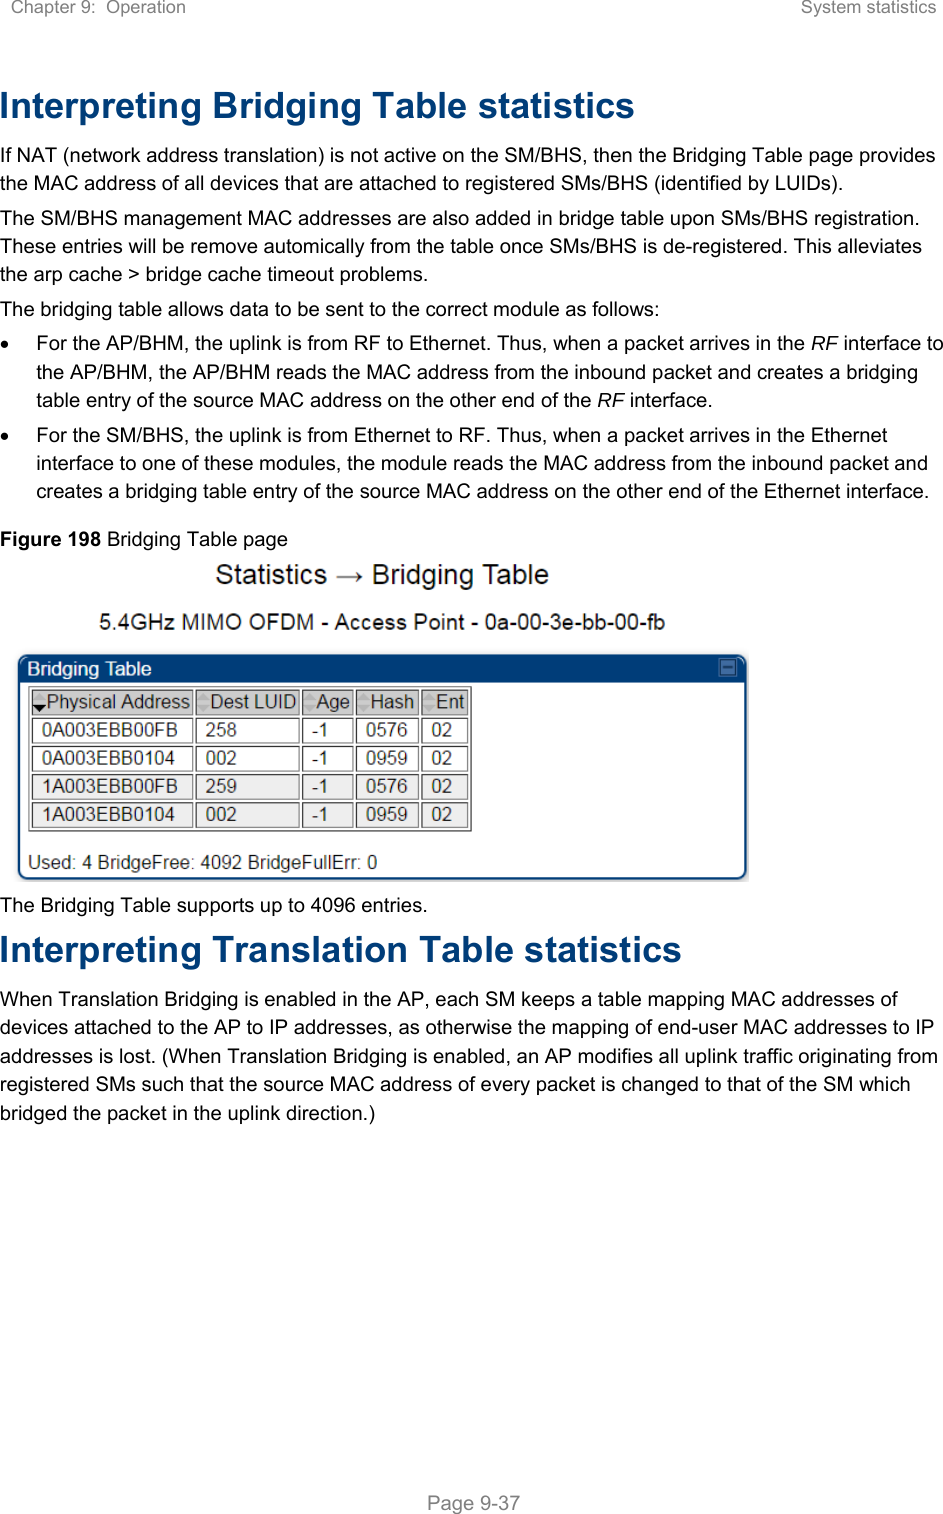 Chapter 9:  Operation  System statistics   Page 9-37 Interpreting Bridging Table statistics If NAT (network address translation) is not active on the SM/BHS, then the Bridging Table page provides the MAC address of all devices that are attached to registered SMs/BHS (identified by LUIDs).  The SM/BHS management MAC addresses are also added in bridge table upon SMs/BHS registration. These entries will be remove automically from the table once SMs/BHS is de-registered. This alleviates the arp cache &gt; bridge cache timeout problems. The bridging table allows data to be sent to the correct module as follows:   For the AP/BHM, the uplink is from RF to Ethernet. Thus, when a packet arrives in the RF interface to the AP/BHM, the AP/BHM reads the MAC address from the inbound packet and creates a bridging table entry of the source MAC address on the other end of the RF interface.   For the SM/BHS, the uplink is from Ethernet to RF. Thus, when a packet arrives in the Ethernet interface to one of these modules, the module reads the MAC address from the inbound packet and creates a bridging table entry of the source MAC address on the other end of the Ethernet interface. Figure 198 Bridging Table page    The Bridging Table supports up to 4096 entries. Interpreting Translation Table statistics When Translation Bridging is enabled in the AP, each SM keeps a table mapping MAC addresses of devices attached to the AP to IP addresses, as otherwise the mapping of end-user MAC addresses to IP addresses is lost. (When Translation Bridging is enabled, an AP modifies all uplink traffic originating from registered SMs such that the source MAC address of every packet is changed to that of the SM which bridged the packet in the uplink direction.) 